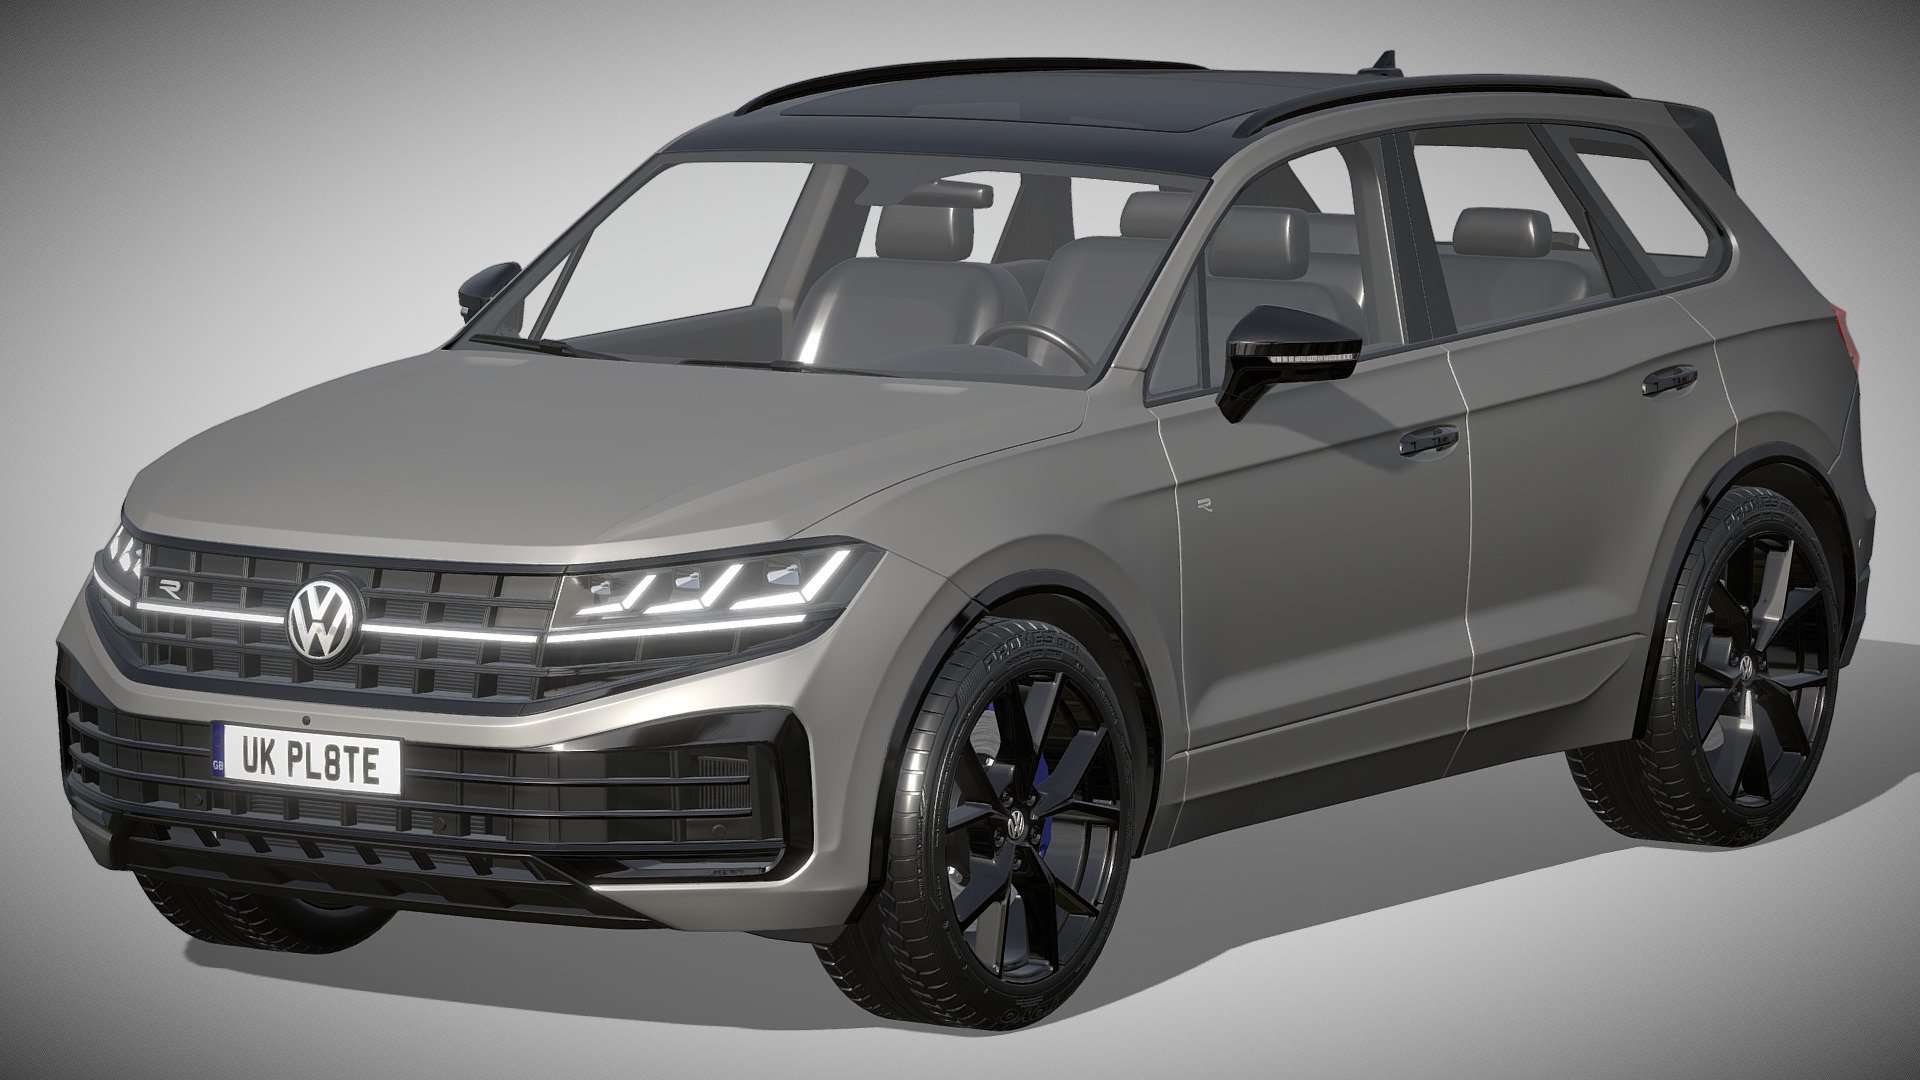 Volkswagen Touareg R eHybrid 2024

https://www.volkswagen.de/de/modelle.html/app/der-neue-touareg.app

Clean geometry Light weight model, yet completely detailed for HI-Res renders. Use for movies, Advertisements or games

Corona render and materials

All textures include in *.rar files

Lighting setup is not included in the file! - Volkswagen Touareg R eHybrid 2024 - Buy Royalty Free 3D model by zifir3d 3d model